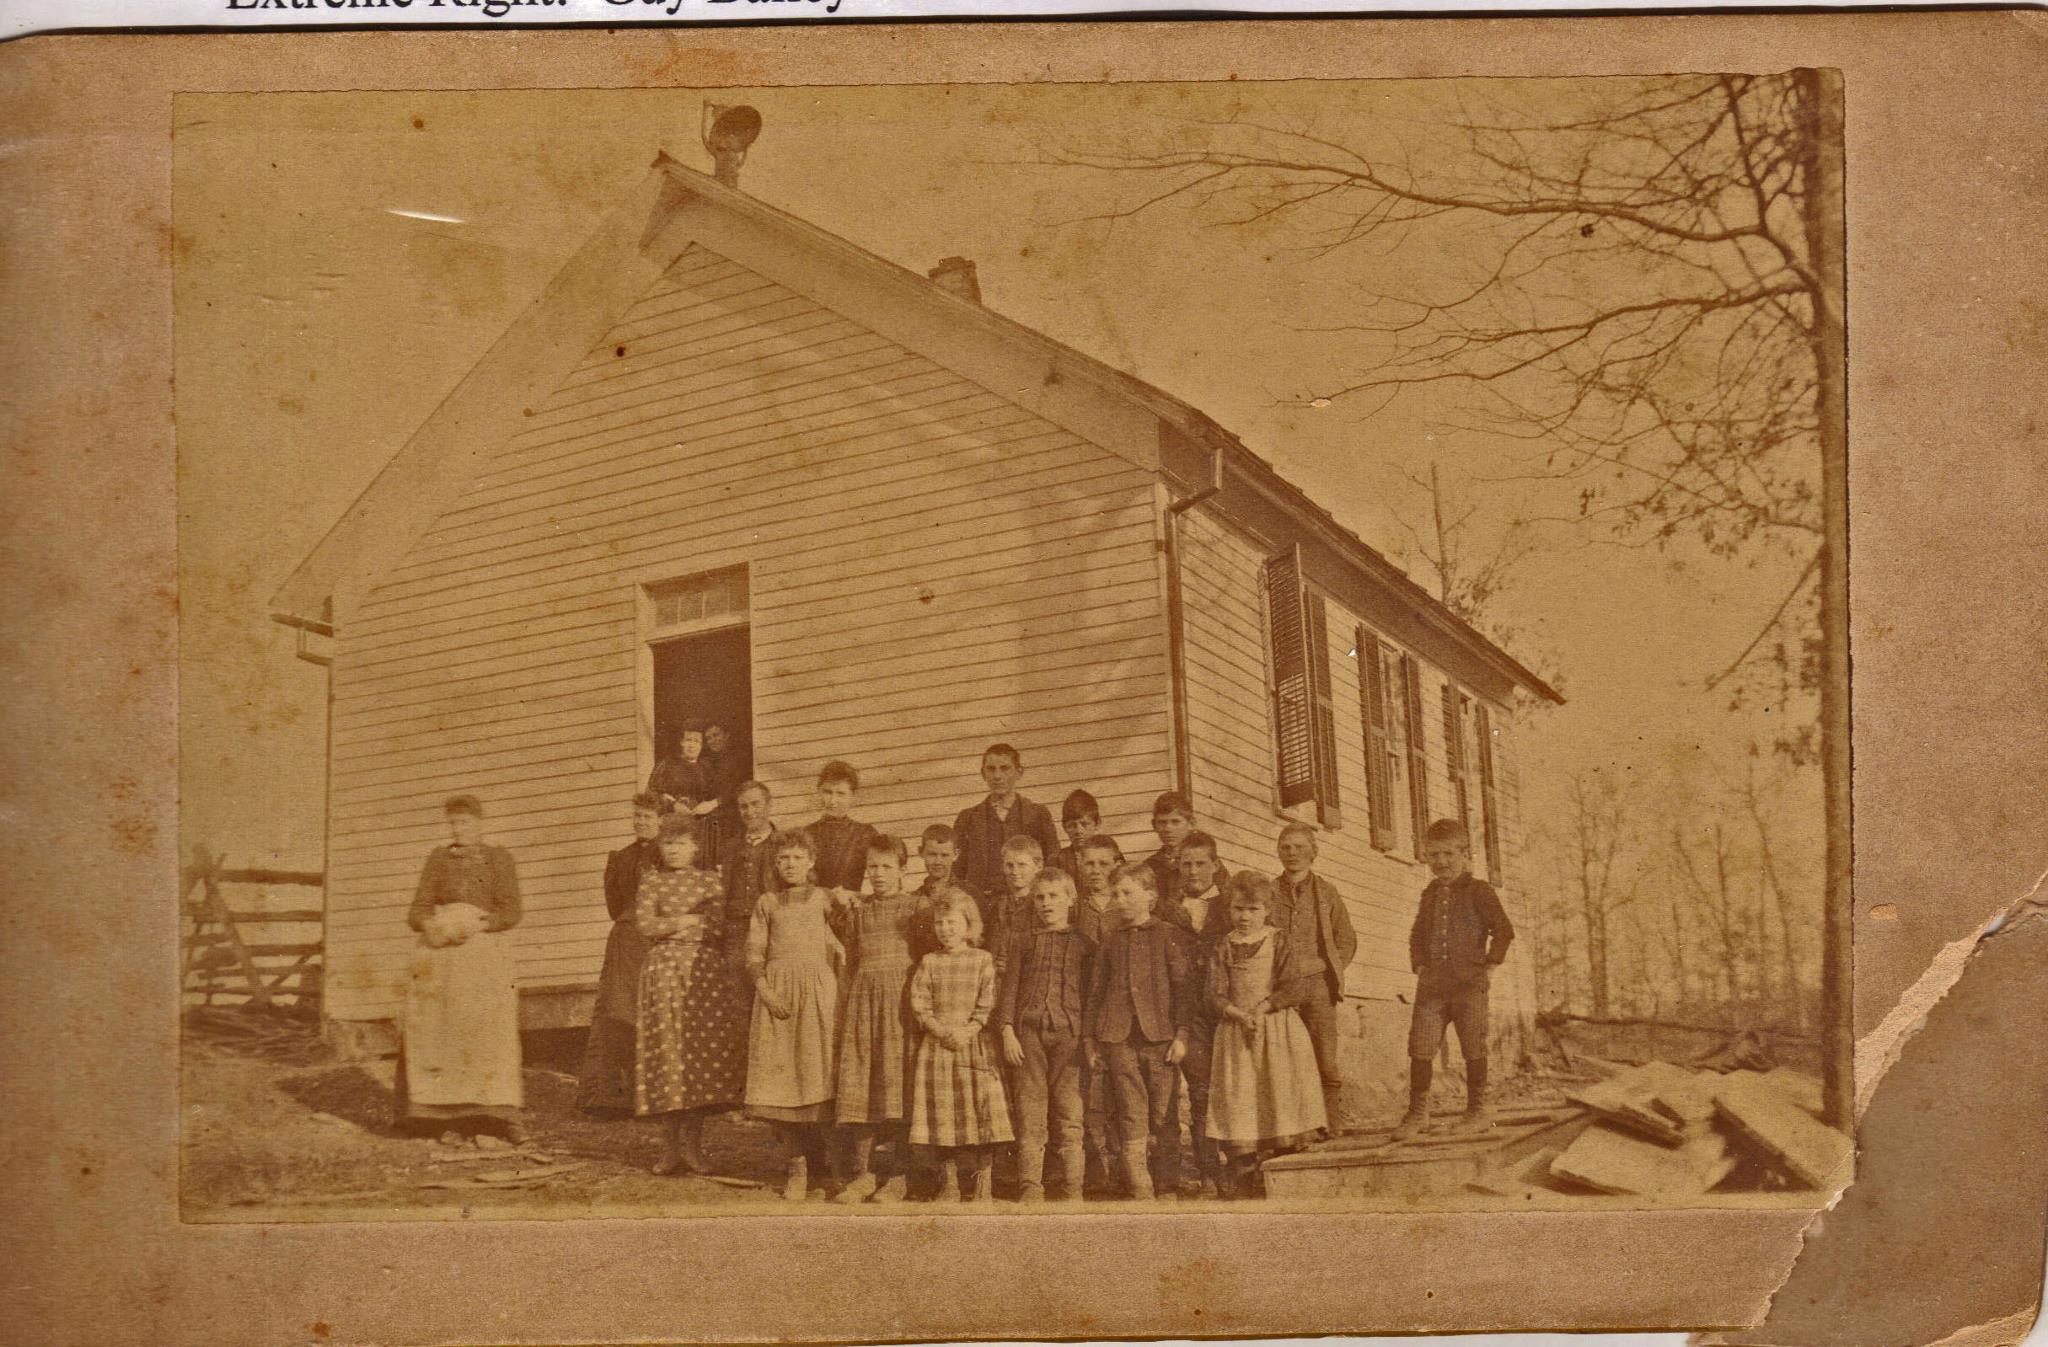 Image from 1900 of a class in the Lubeck District of West Virginia.